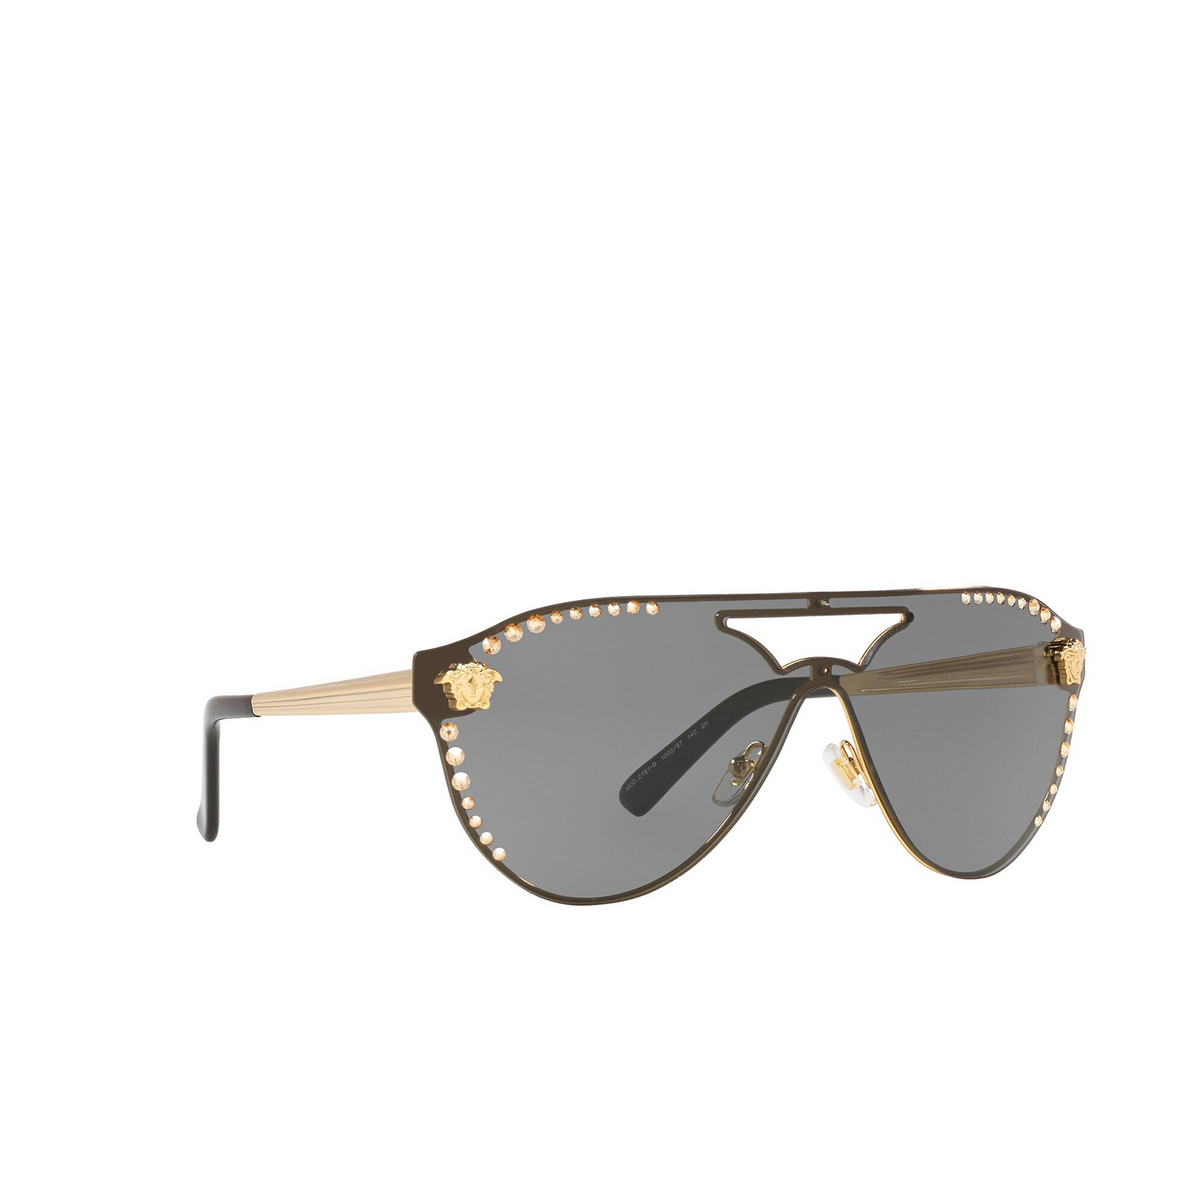 Versace® Round Sunglasses: VE2161B color Gold 100287 - three-quarters view.